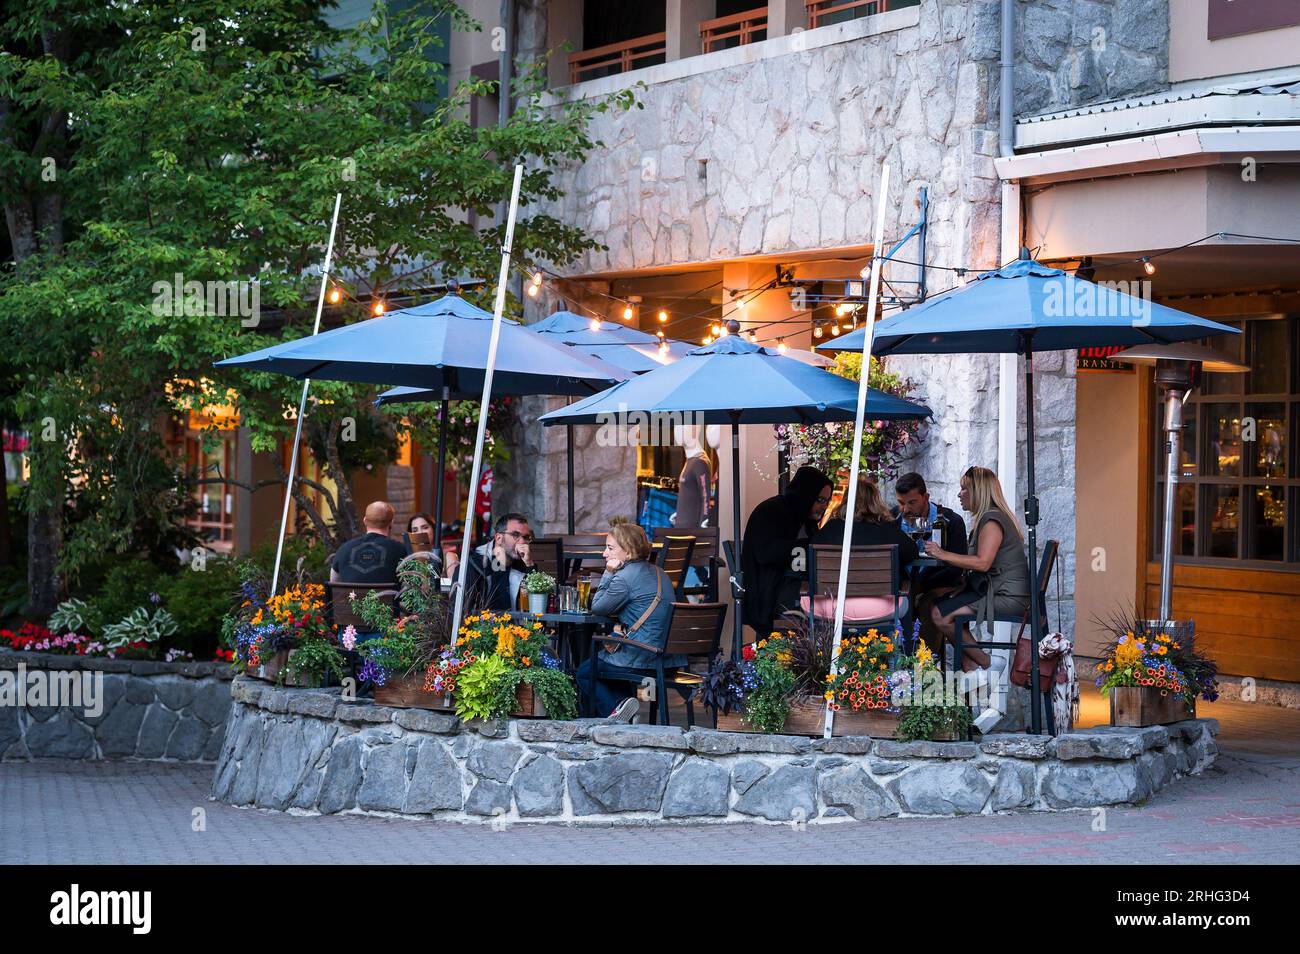 Tourists dine outside on a summer evening on restaurant patios in the Whistler Village.  Whistler BC, Canada. Stock Photo